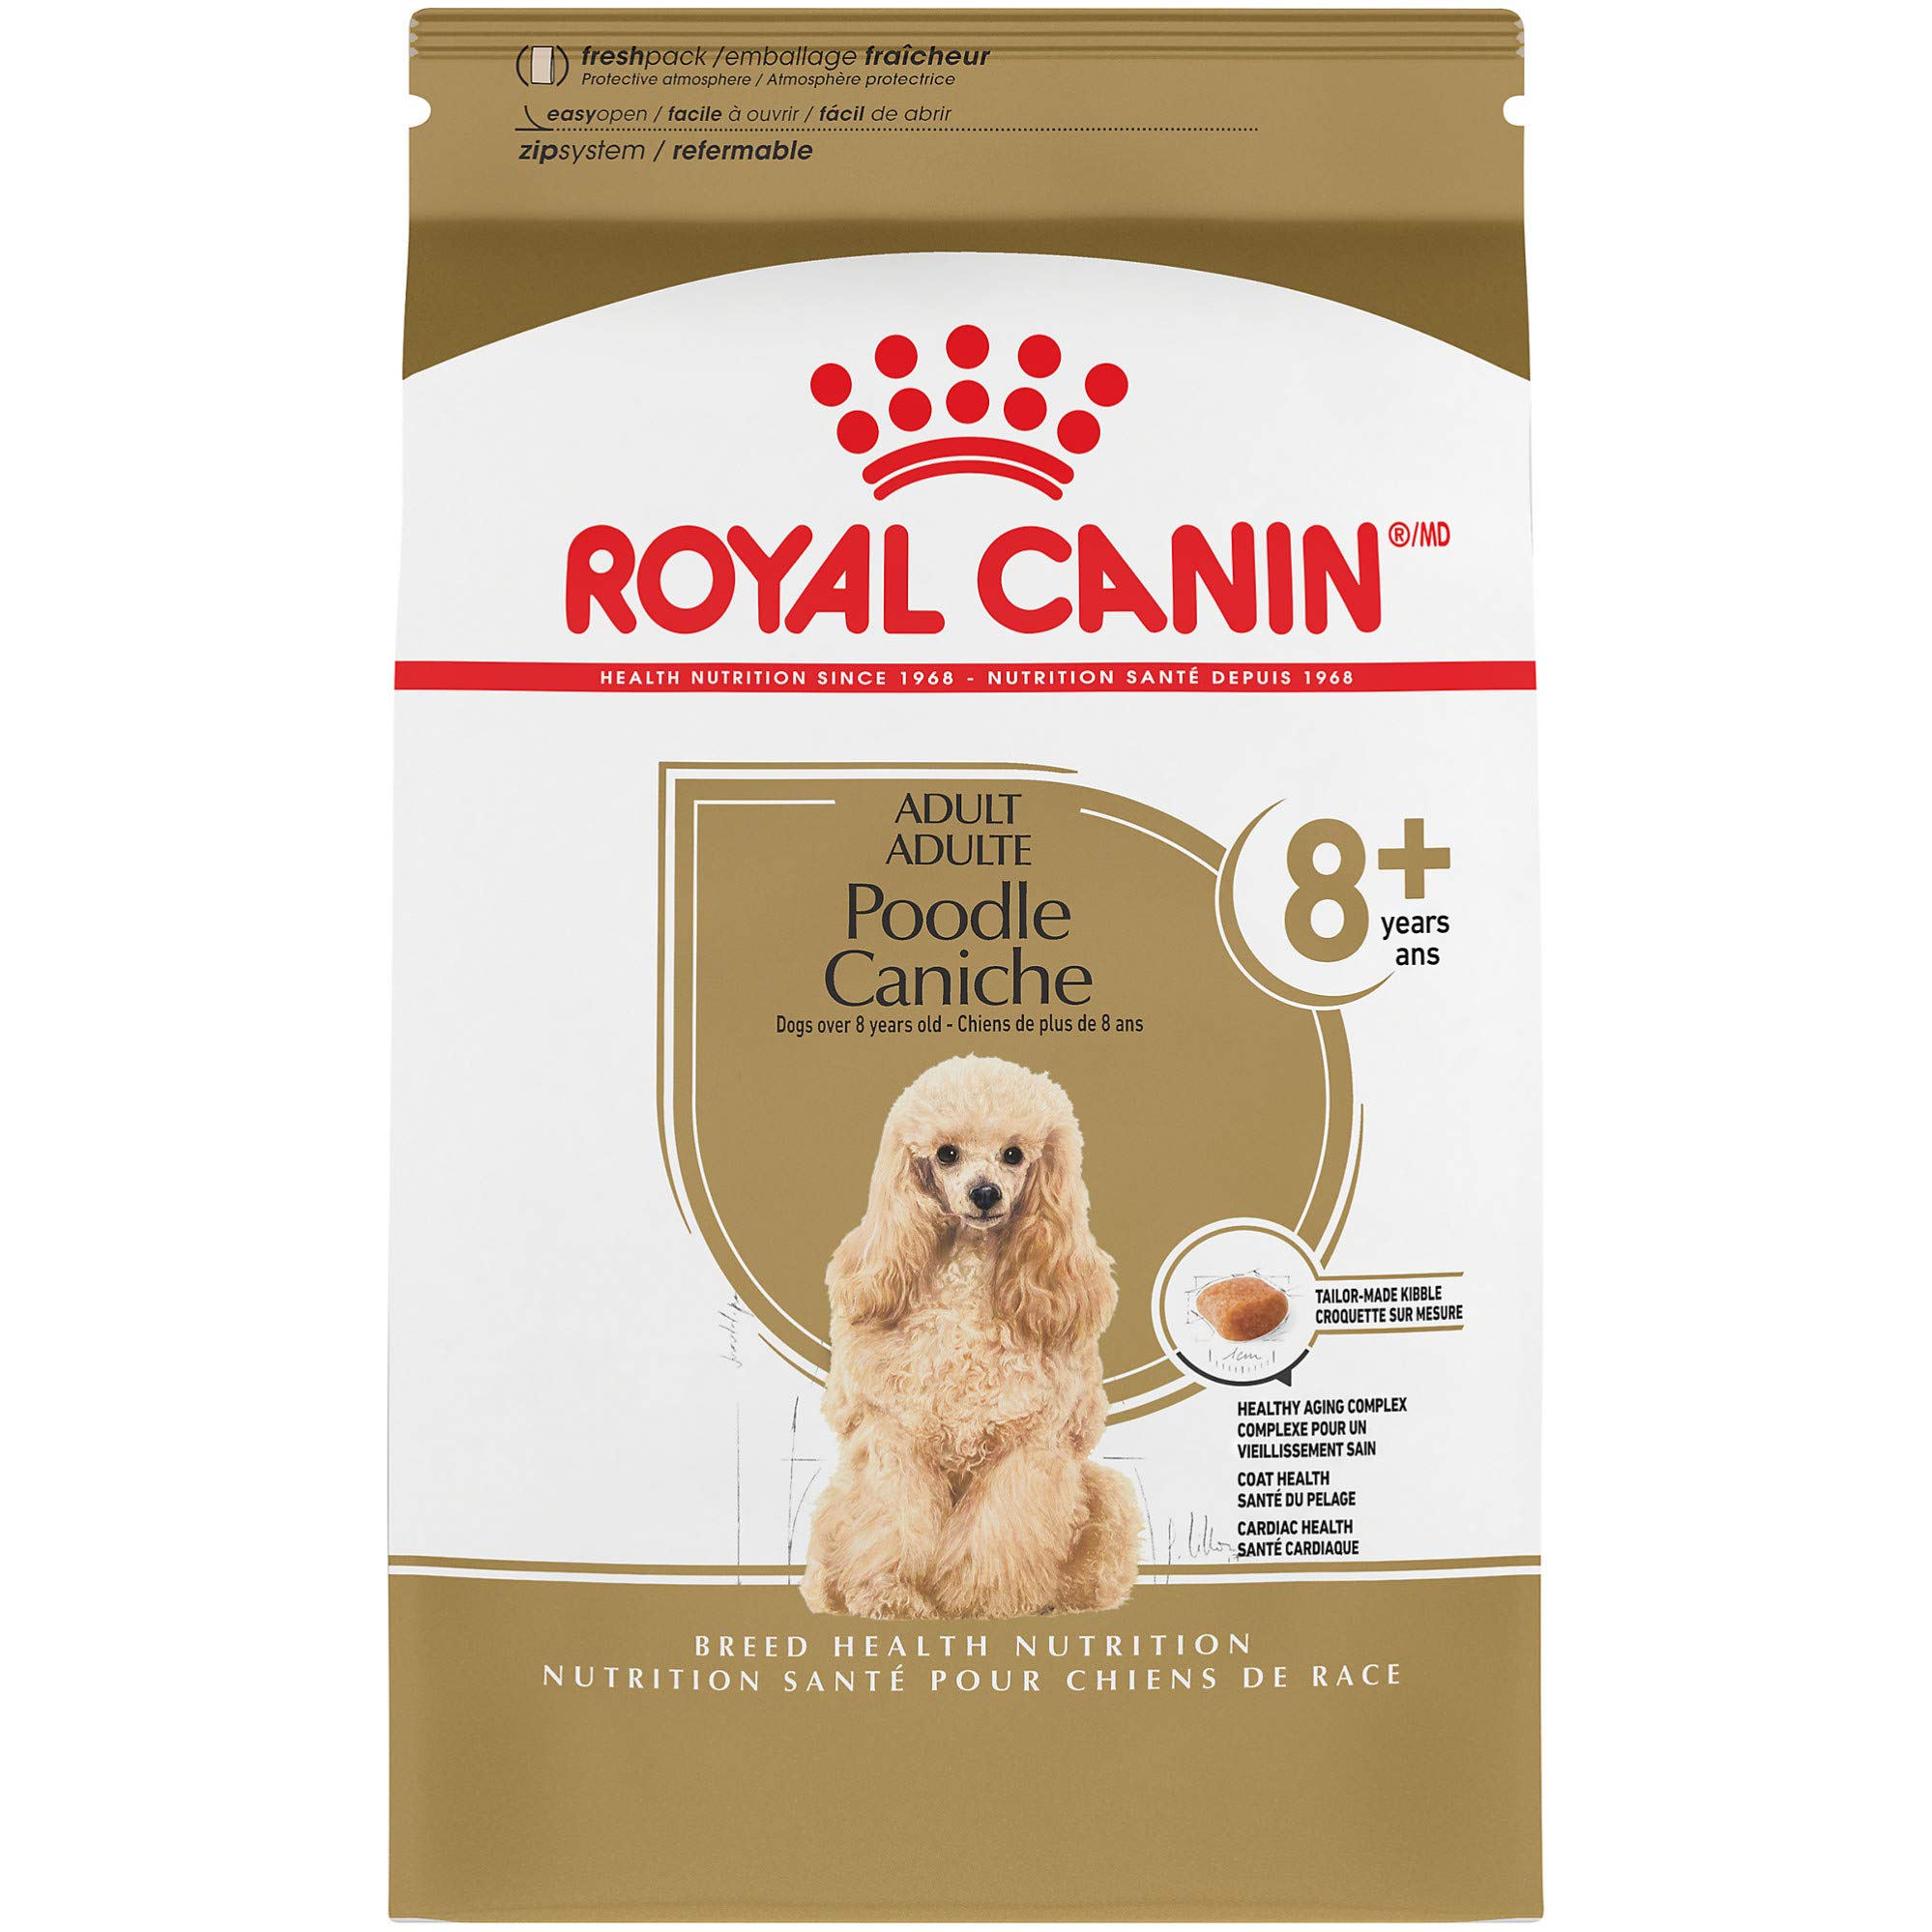 Top 5 Best Dog Food For Toy Poodle In